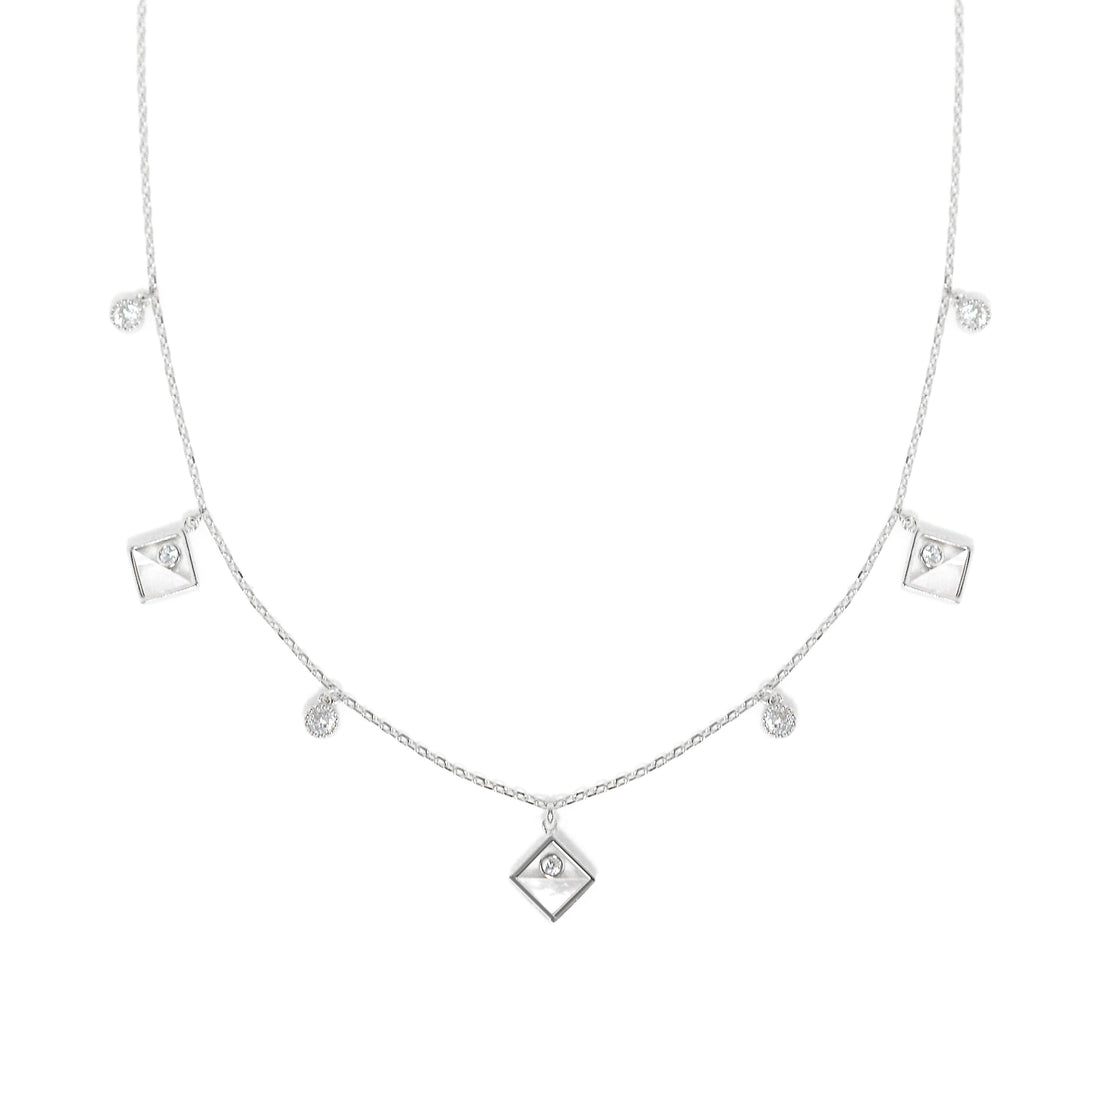 Exquisite Dolce Mondo Silver Charm Square Necklace with mother pearl and Sparkling Cubic Zirconia